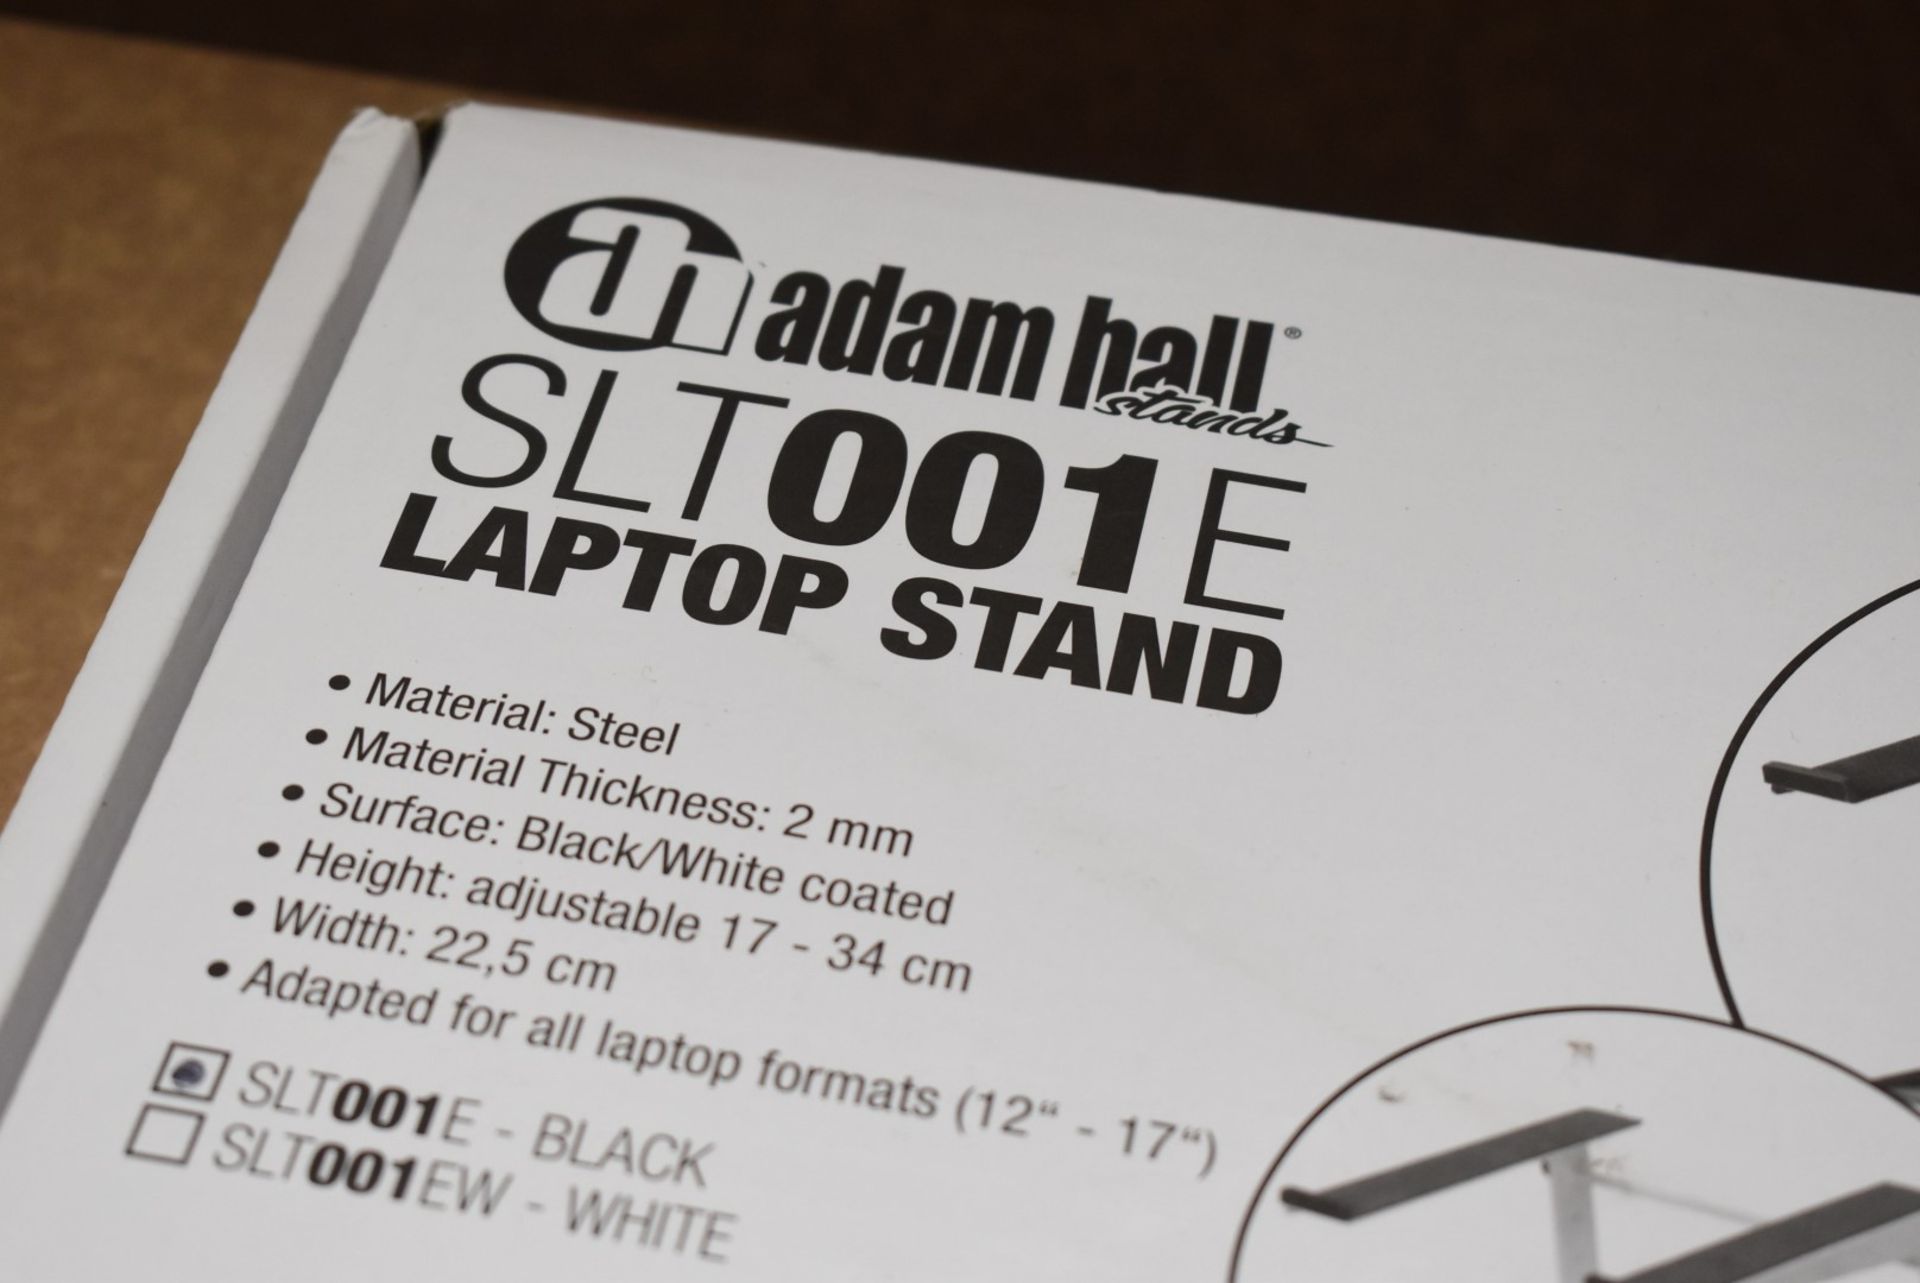 1 x Adam Hall Laptop Stand in Black - New and Boxed - Suitable For 12" - 17" Laptop Formats Type - Image 3 of 5